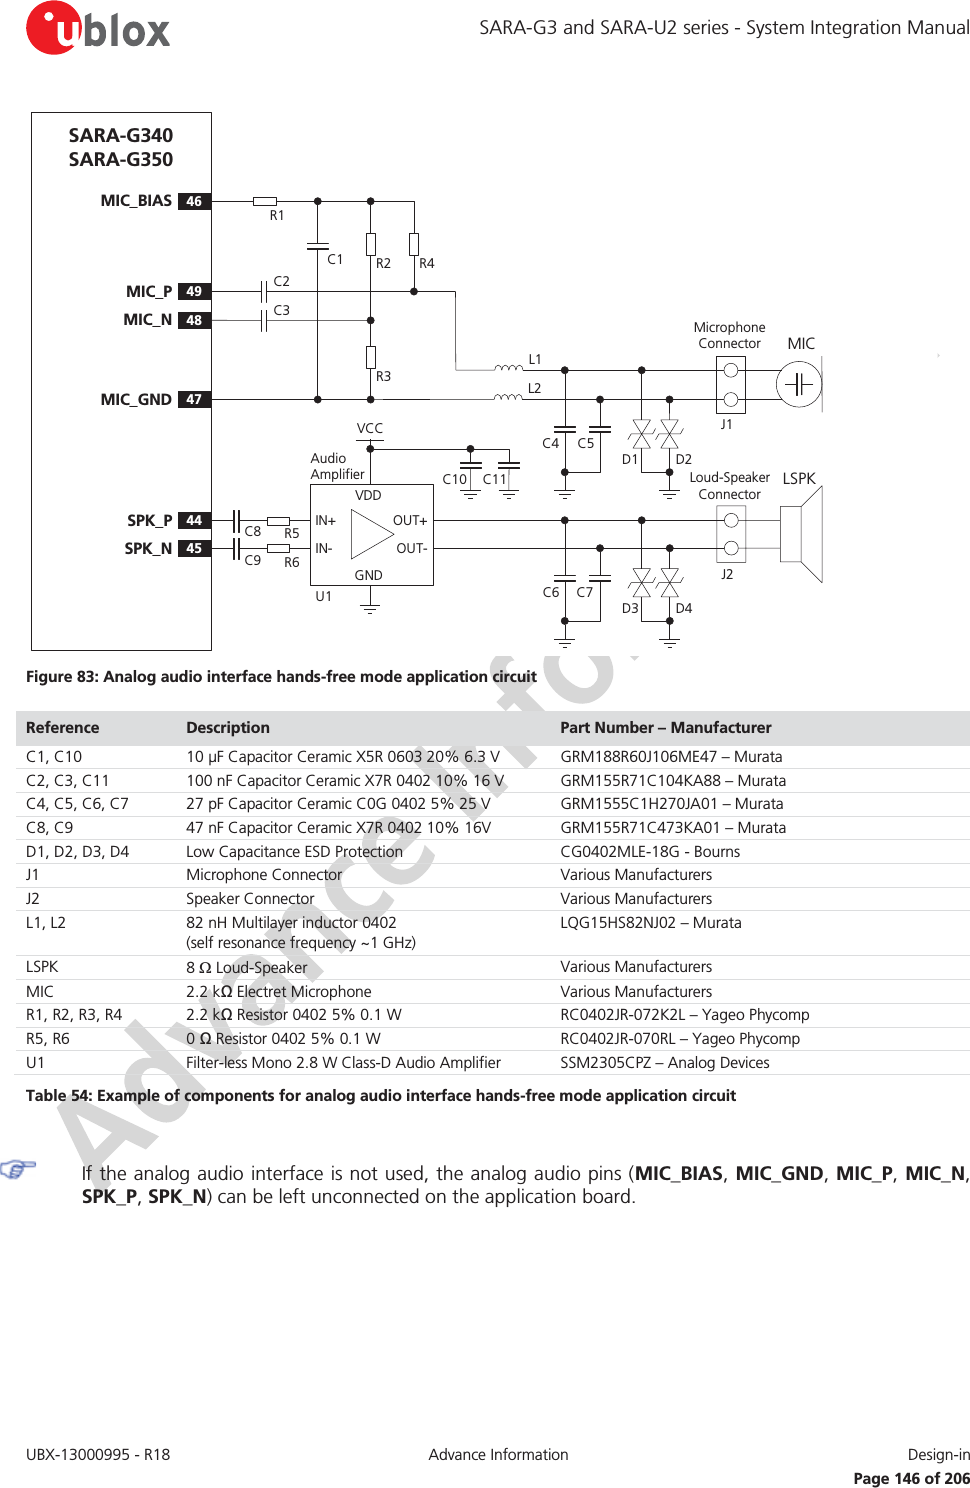 SARA-G3 and SARA-U2 series - System Integration Manual UBX-13000995 - R18  Advance Information  Design-in   Page 146 of 206 SARA-G340 SARA-G35049MIC_PR1R2 R444SPK_P48MIC_N45SPK_NR3C146MIC_BIAS47MIC_GNDC2C3C6 C7L2L1C5C4LSPKLoud-Speaker ConnectorJ2Microphone ConnectorMICJ1OUT+IN+GNDU1OUT-IN-C8C9R5R6VDDC11C10Audio AmplifierVCCD3D1D4D2 Figure 83: Analog audio interface hands-free mode application circuit Reference  Description  Part Number – Manufacturer C1, C10 10 μF Capacitor Ceramic X5R 0603 20% 6.3 V GRM188R60J106ME47 – Murata C2, C3, C11 100 nF Capacitor Ceramic X7R 0402 10% 16 V GRM155R71C104KA88 – Murata C4, C5, C6, C7 27 pF Capacitor Ceramic C0G 0402 5% 25 V  GRM1555C1H270JA01 – Murata C8, C9 47 nF Capacitor Ceramic X7R 0402 10% 16V GRM155R71C473KA01 – Murata D1, D2, D3, D4 Low Capacitance ESD Protection CG0402MLE-18G - Bourns J1 Microphone Connector Various Manufacturers  J2 Speaker Connector Various Manufacturers  L1, L2 82 nH Multilayer inductor 0402 (self resonance frequency ~1 GHz) LQG15HS82NJ02 – Murata LSPK 8 : Loud-Speaker Various Manufacturers MIC 2.2 kΩ Electret Microphone Various Manufacturers R1, R2, R3, R4 2.2 kΩ Resistor 0402 5% 0.1 W  RC0402JR-072K2L – Yageo Phycomp R5, R6 0 Ω Resistor 0402 5% 0.1 W  RC0402JR-070RL – Yageo Phycomp U1 Filter-less Mono 2.8 W Class-D Audio Amplifier SSM2305CPZ – Analog Devices Table 54: Example of components for analog audio interface hands-free mode application circuit   If the analog audio interface is not used, the analog audio pins (MIC_BIAS, MIC_GND, MIC_P, MIC_N, SPK_P, SPK_N) can be left unconnected on the application board.  